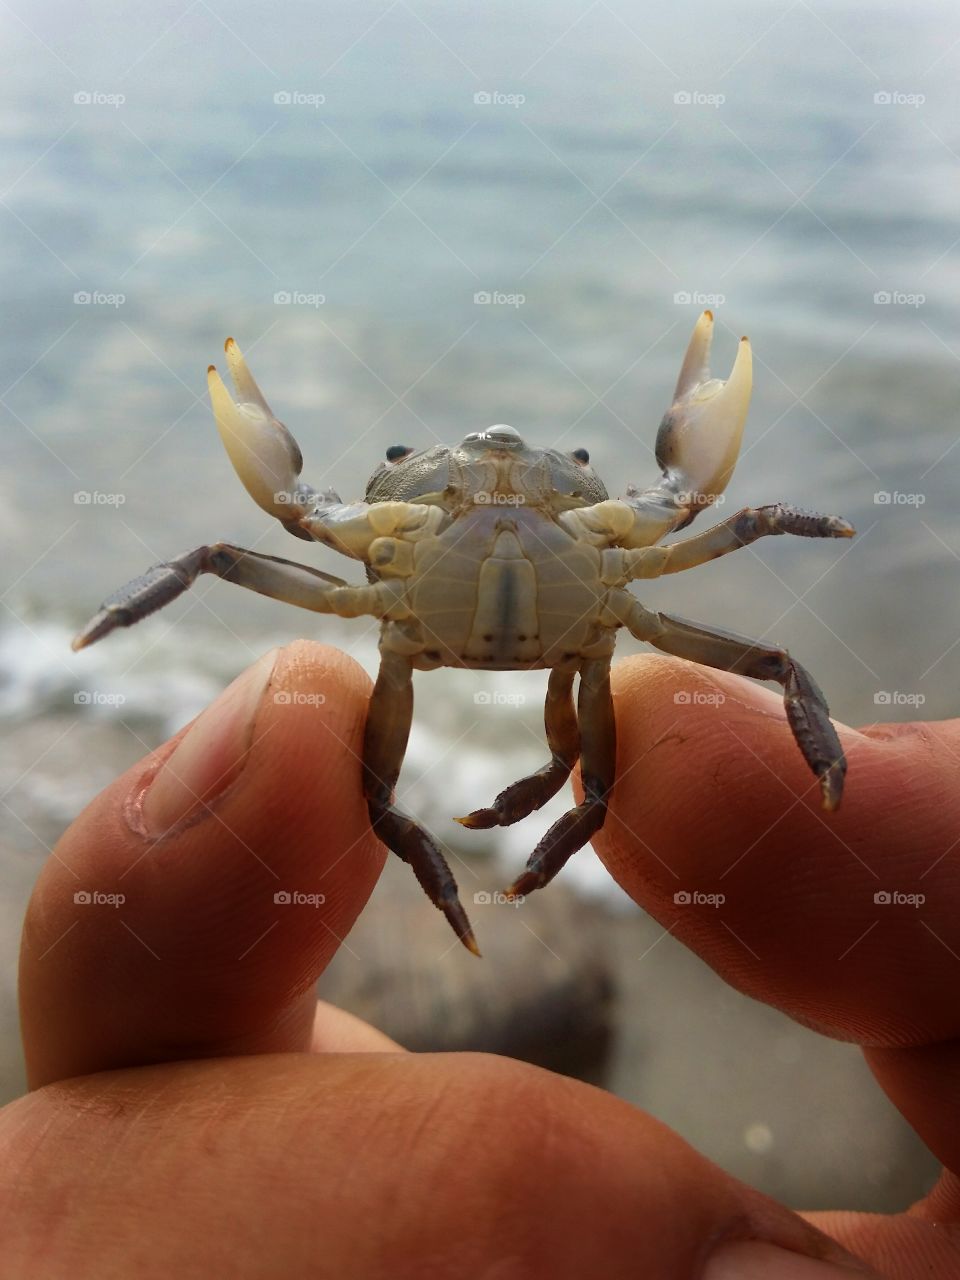 Male Crab Close Up at the Beach